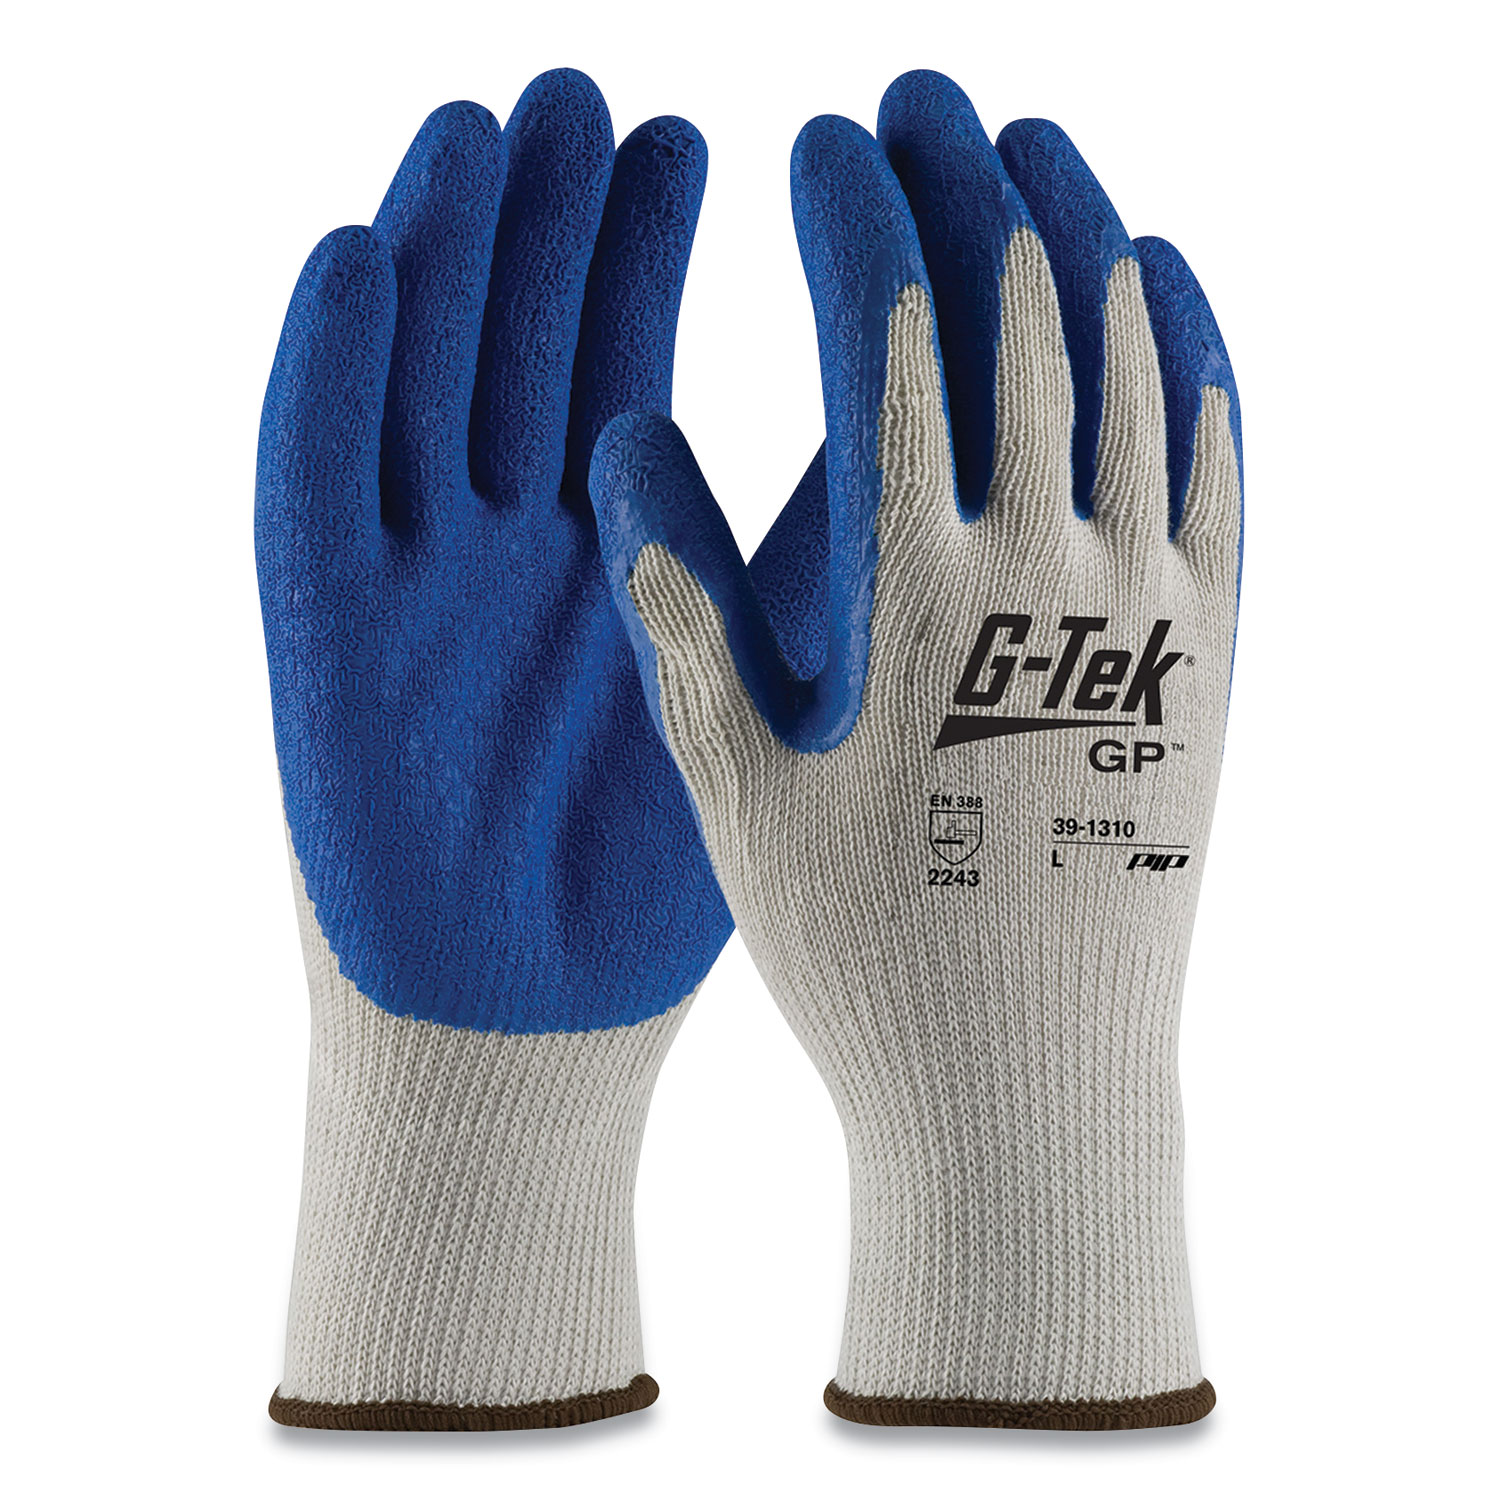  G-Tek 39-1310/XL GP Latex-Coated Cotton/Polyester Gloves, X-Large, Gray/Blue, 12 Pairs (PID179961) 